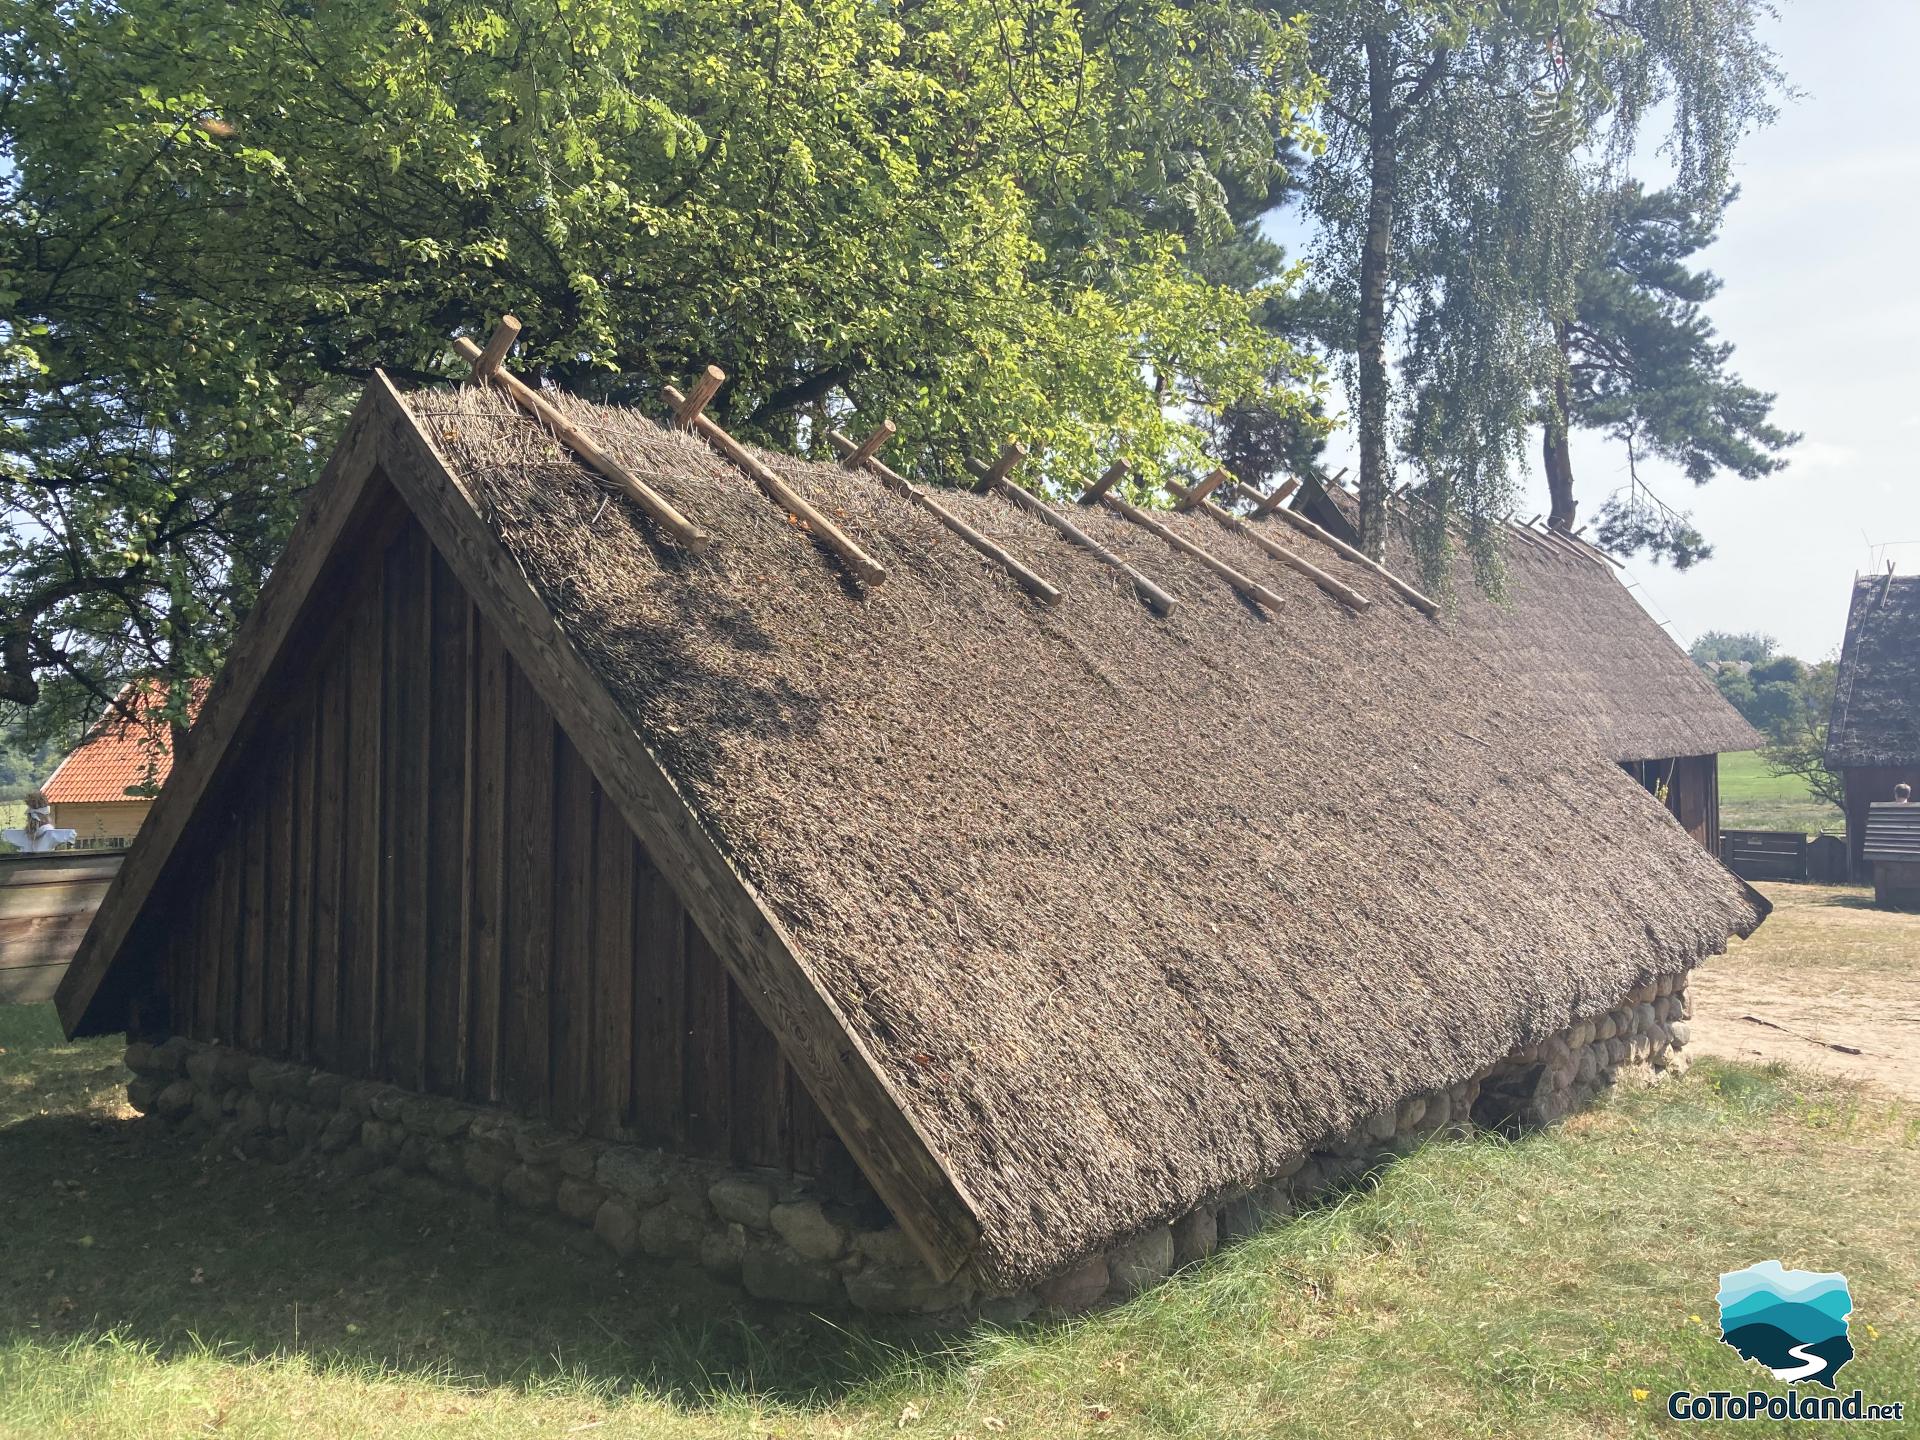 a peasant hut with thatched roof